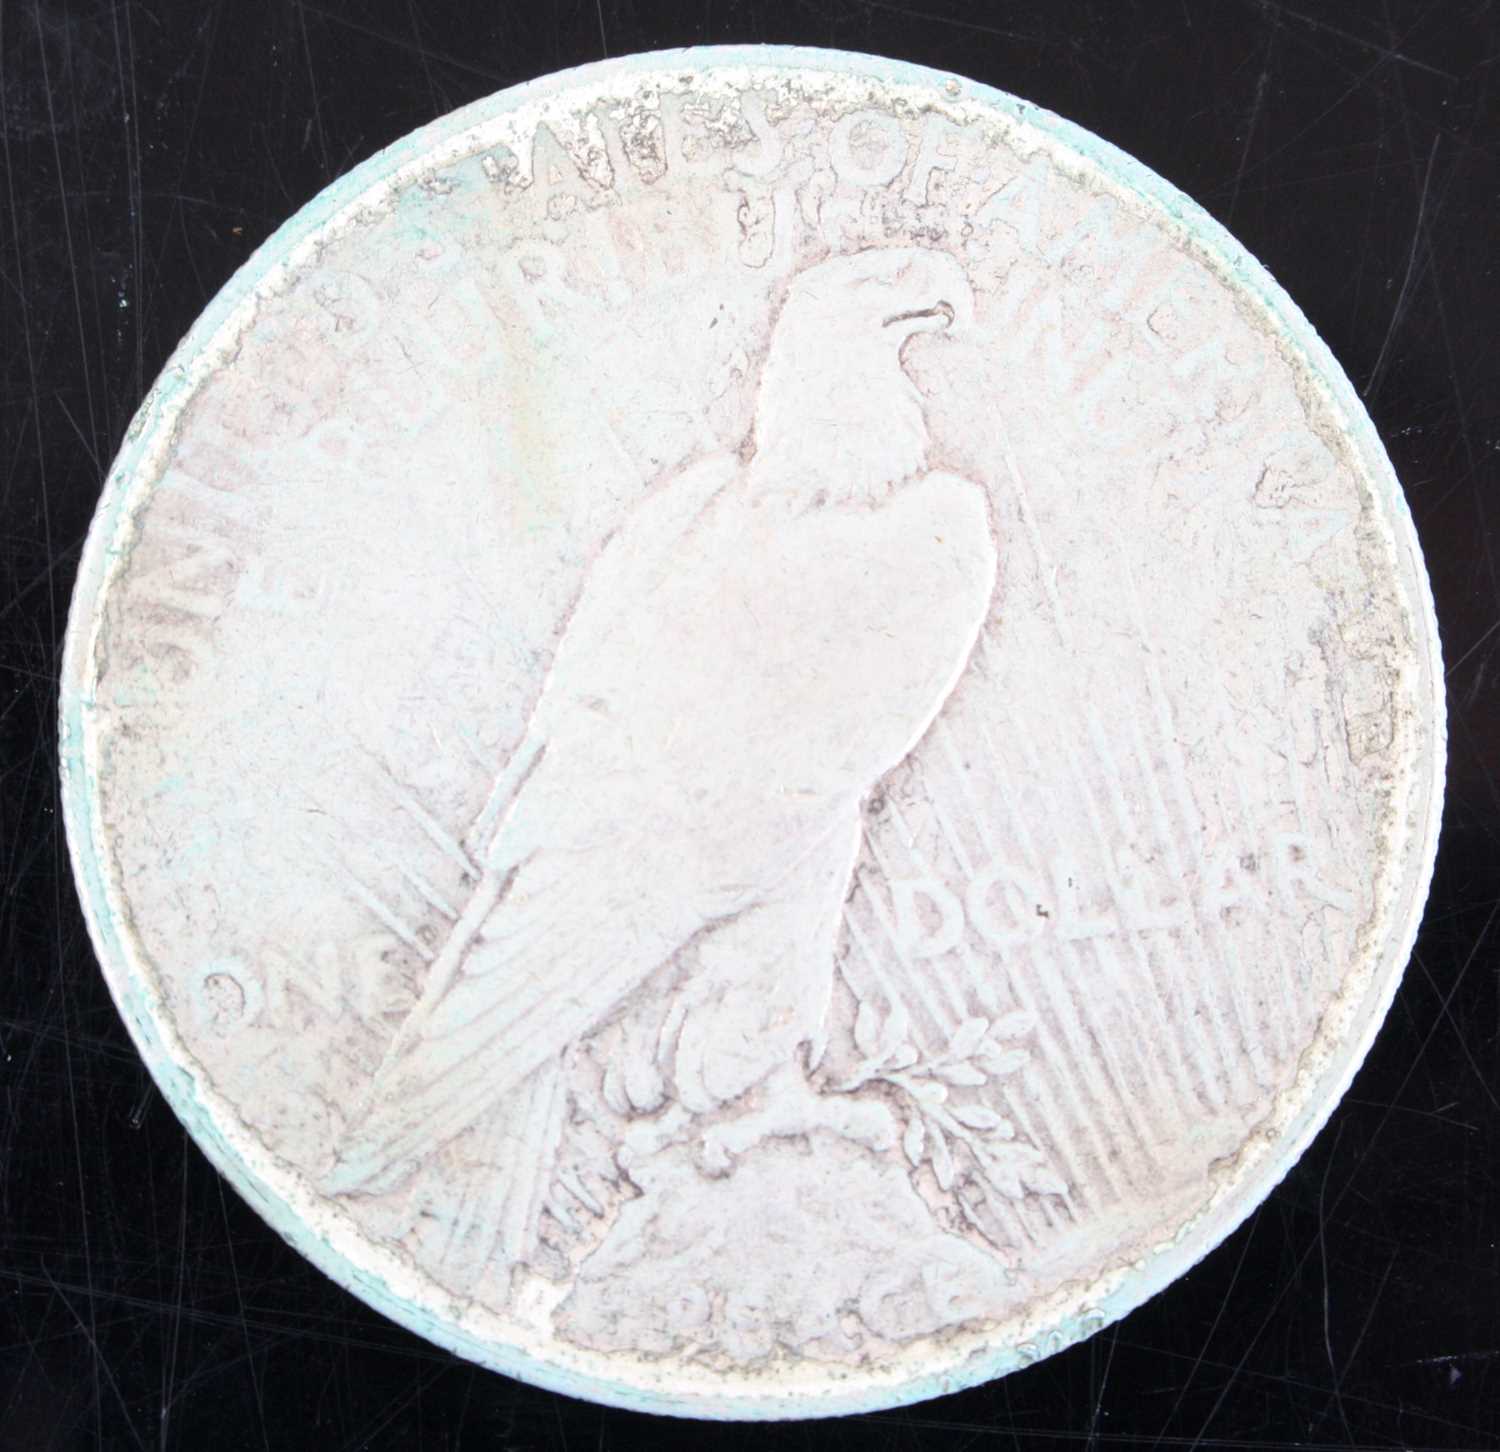 United States of America, 1922 Peace dollar, obv: capped head of Liberty left, headband with rays, - Image 2 of 5